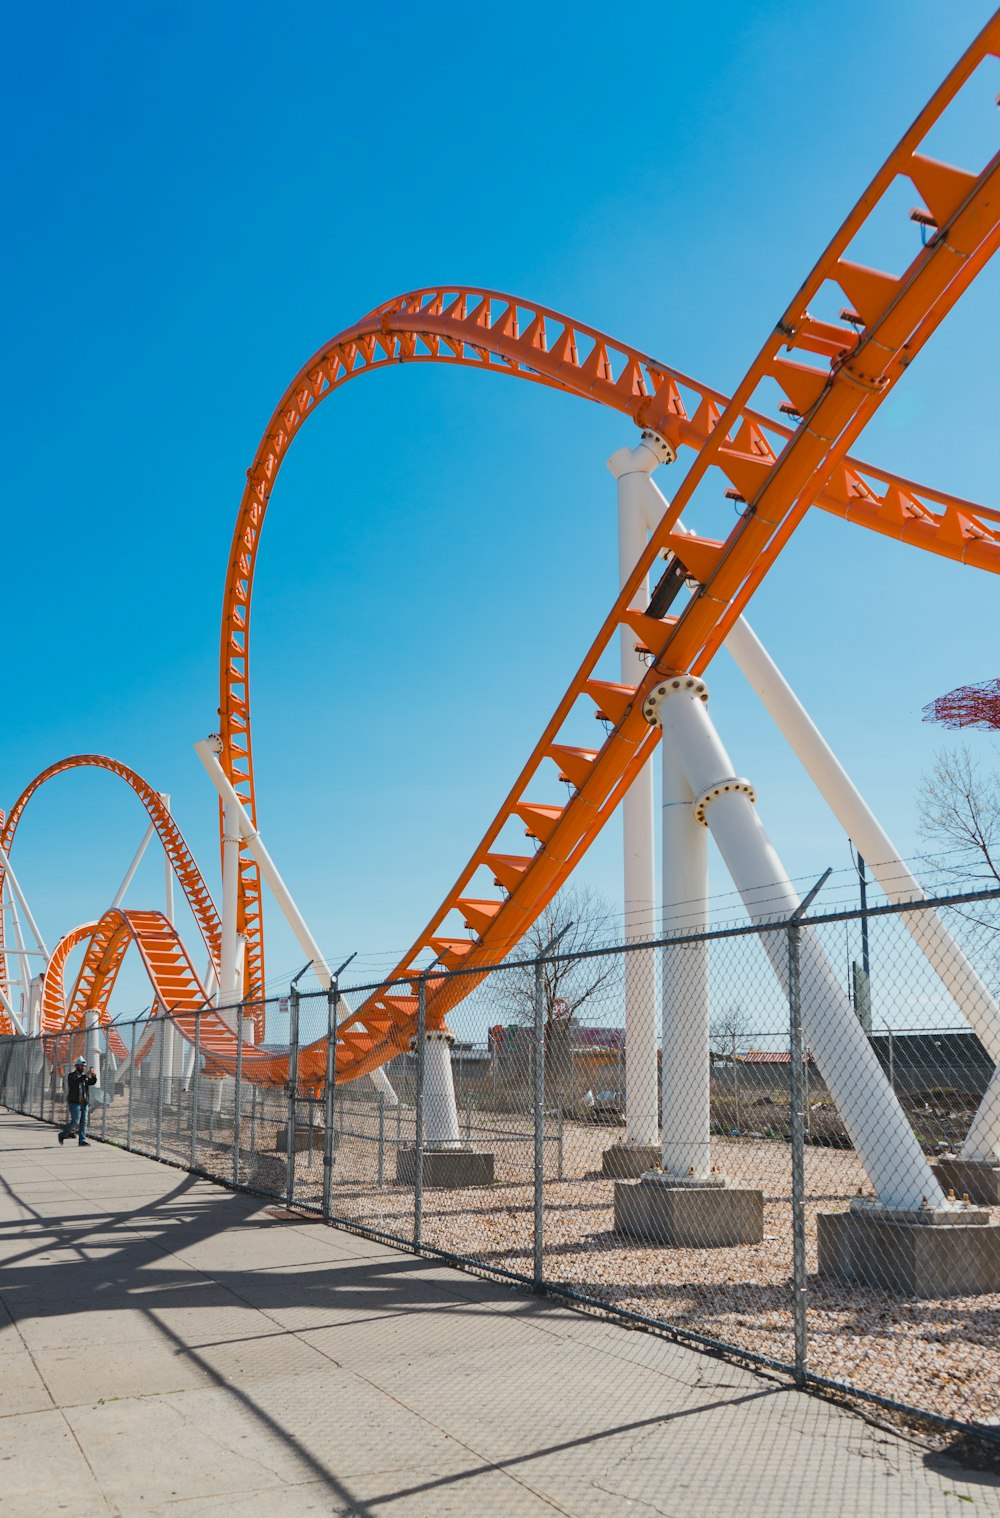 close-up photography of white and orange roller coaster during daytime